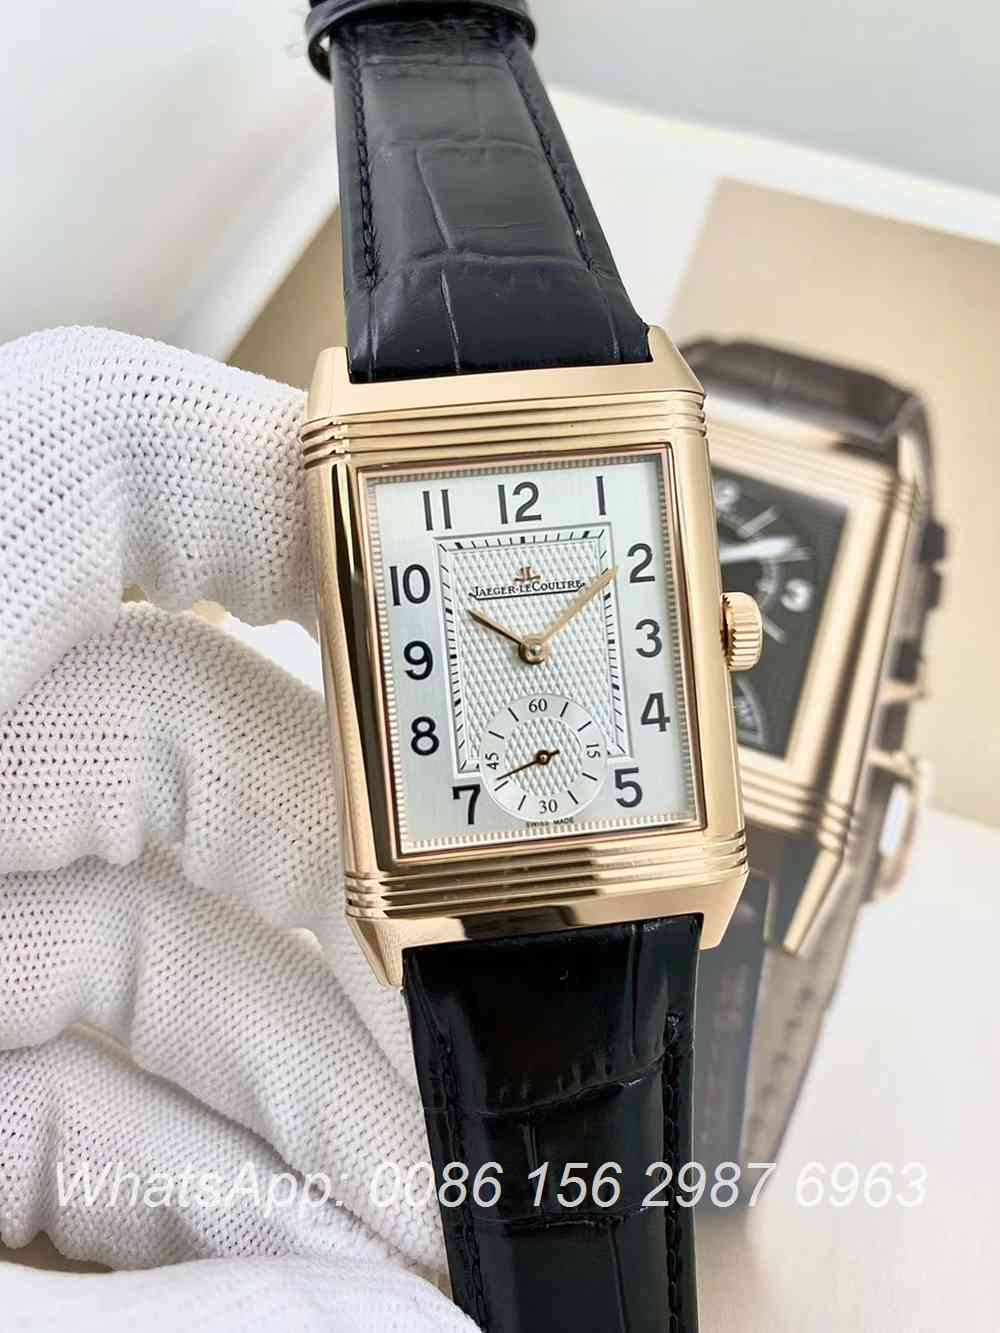 JL160XD317, JL rose gold Reverso classic Large Duoface Small Seconds hands-winding men's watch